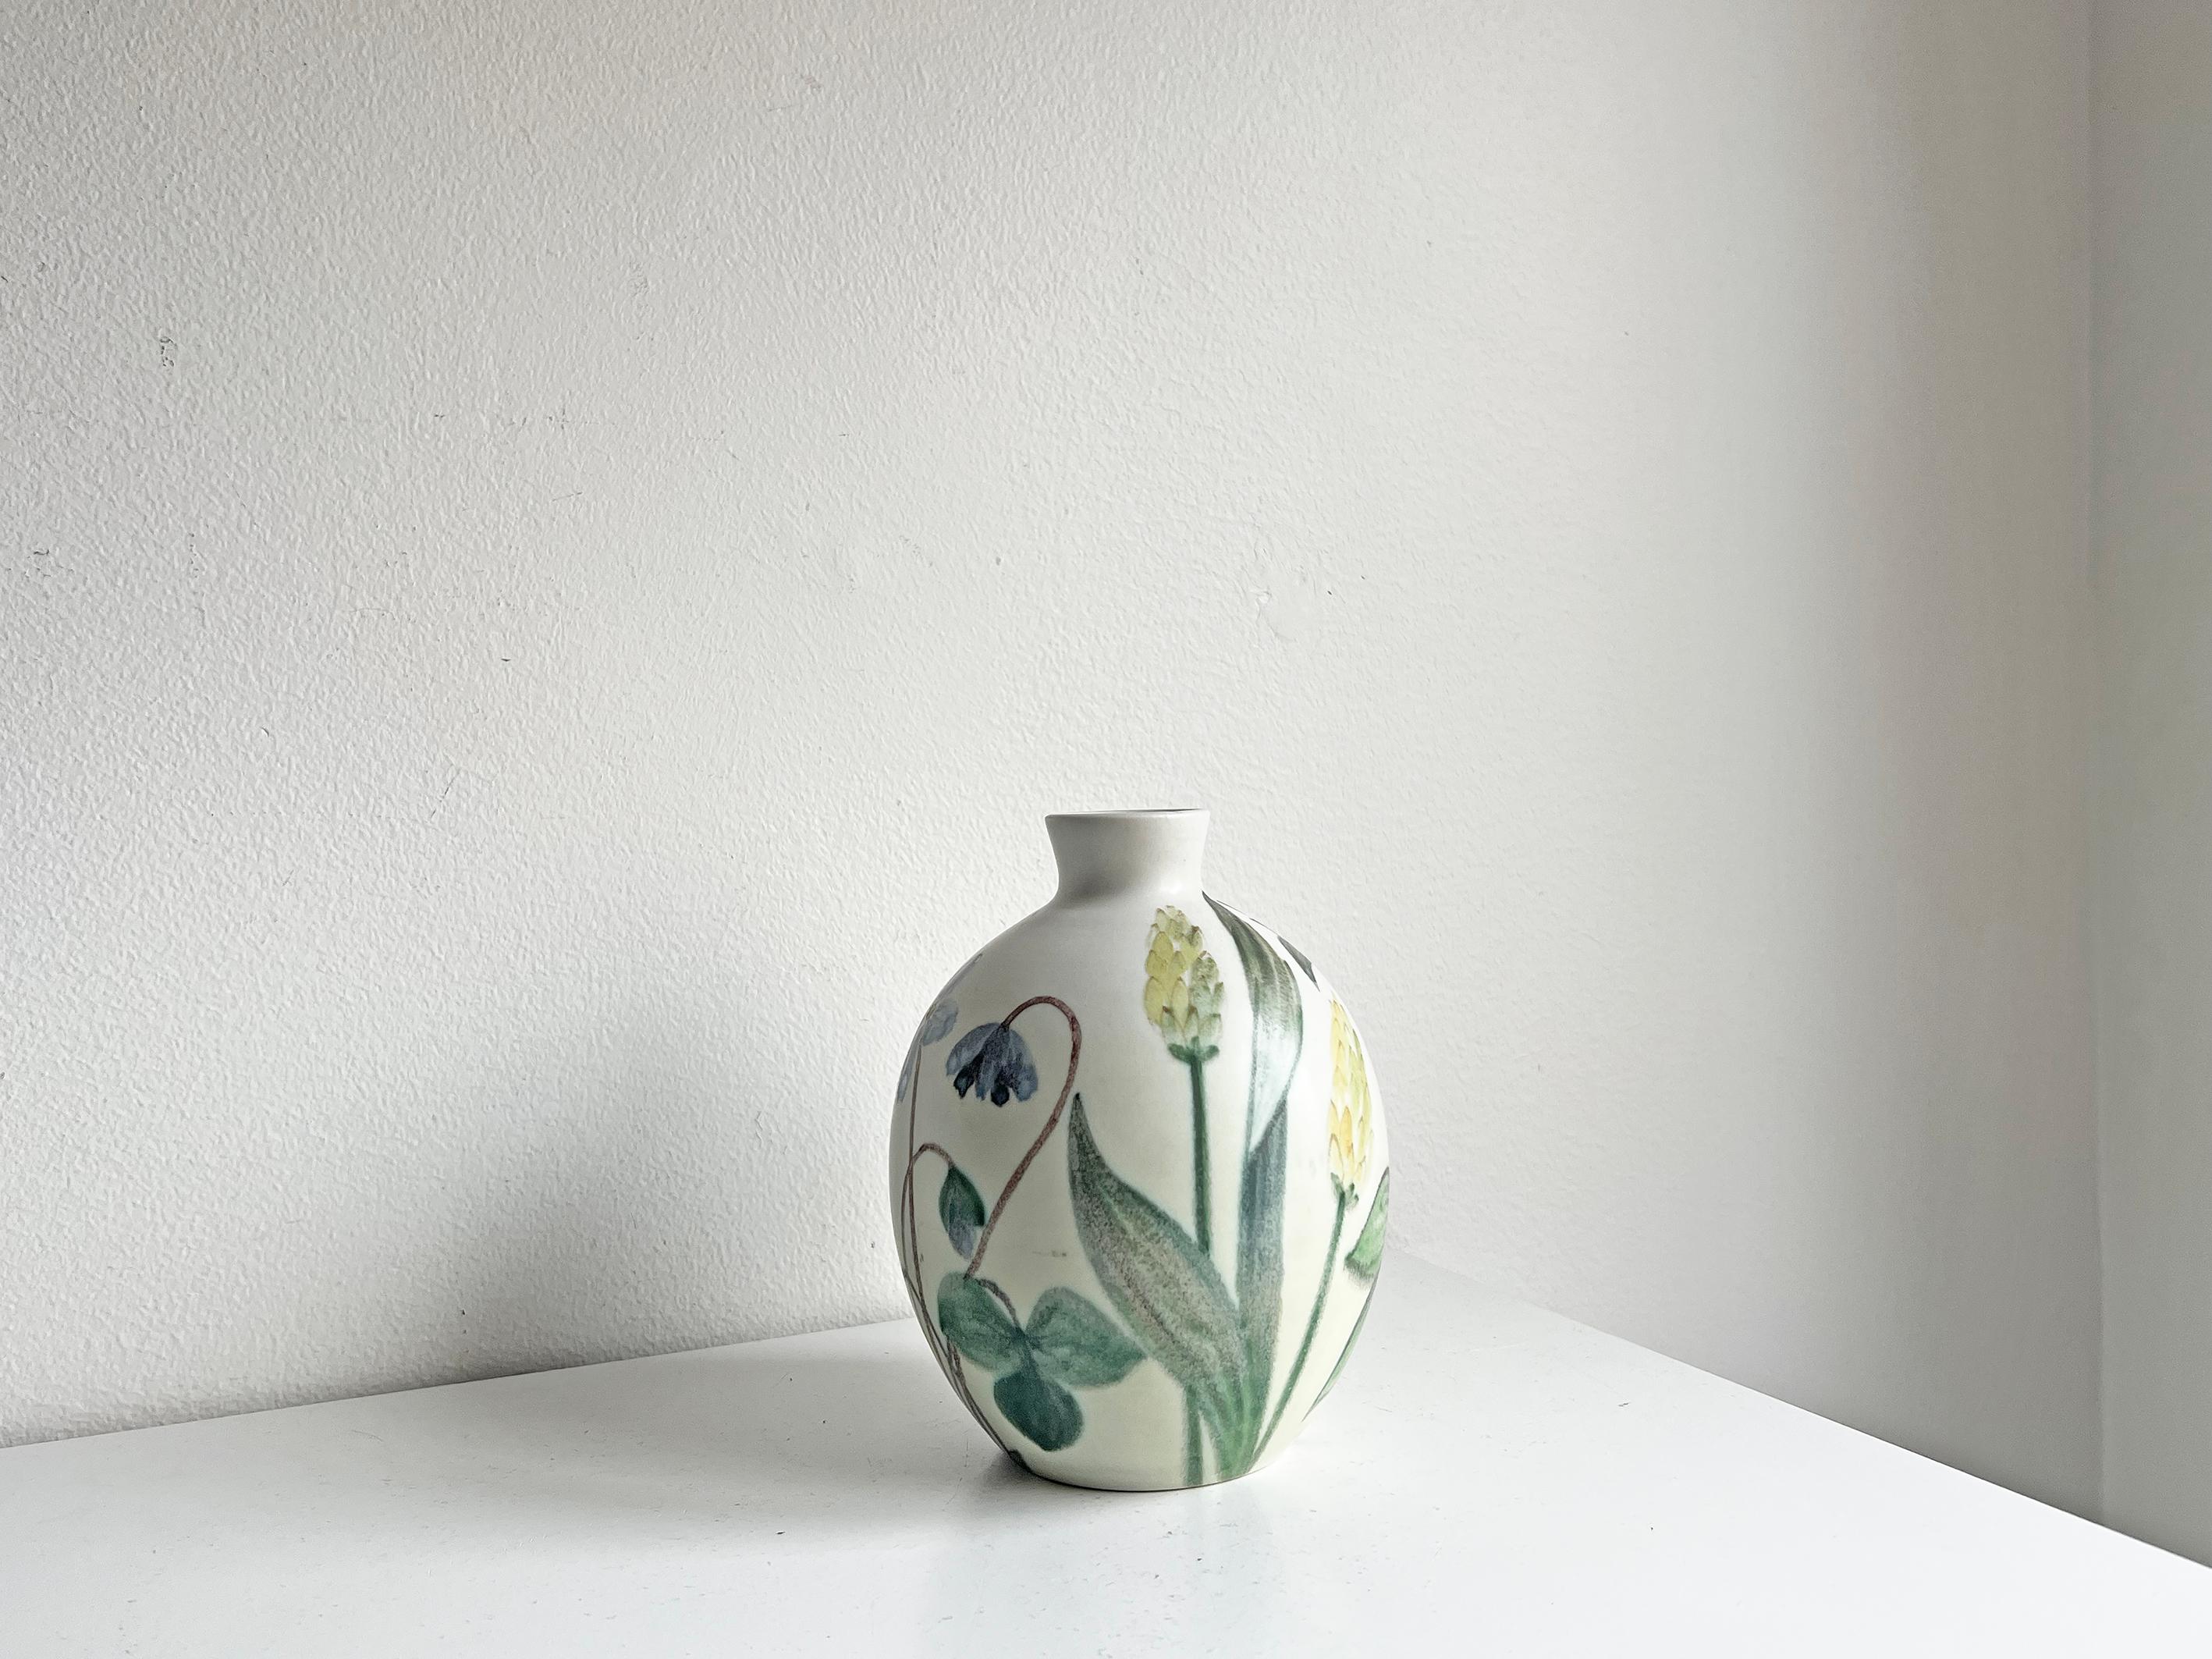 Decorative vase by Carl-Harry Stålhane, produced by Rörstrand in Sweden.
Beautiful floral pattern. Signed with maker's mark.